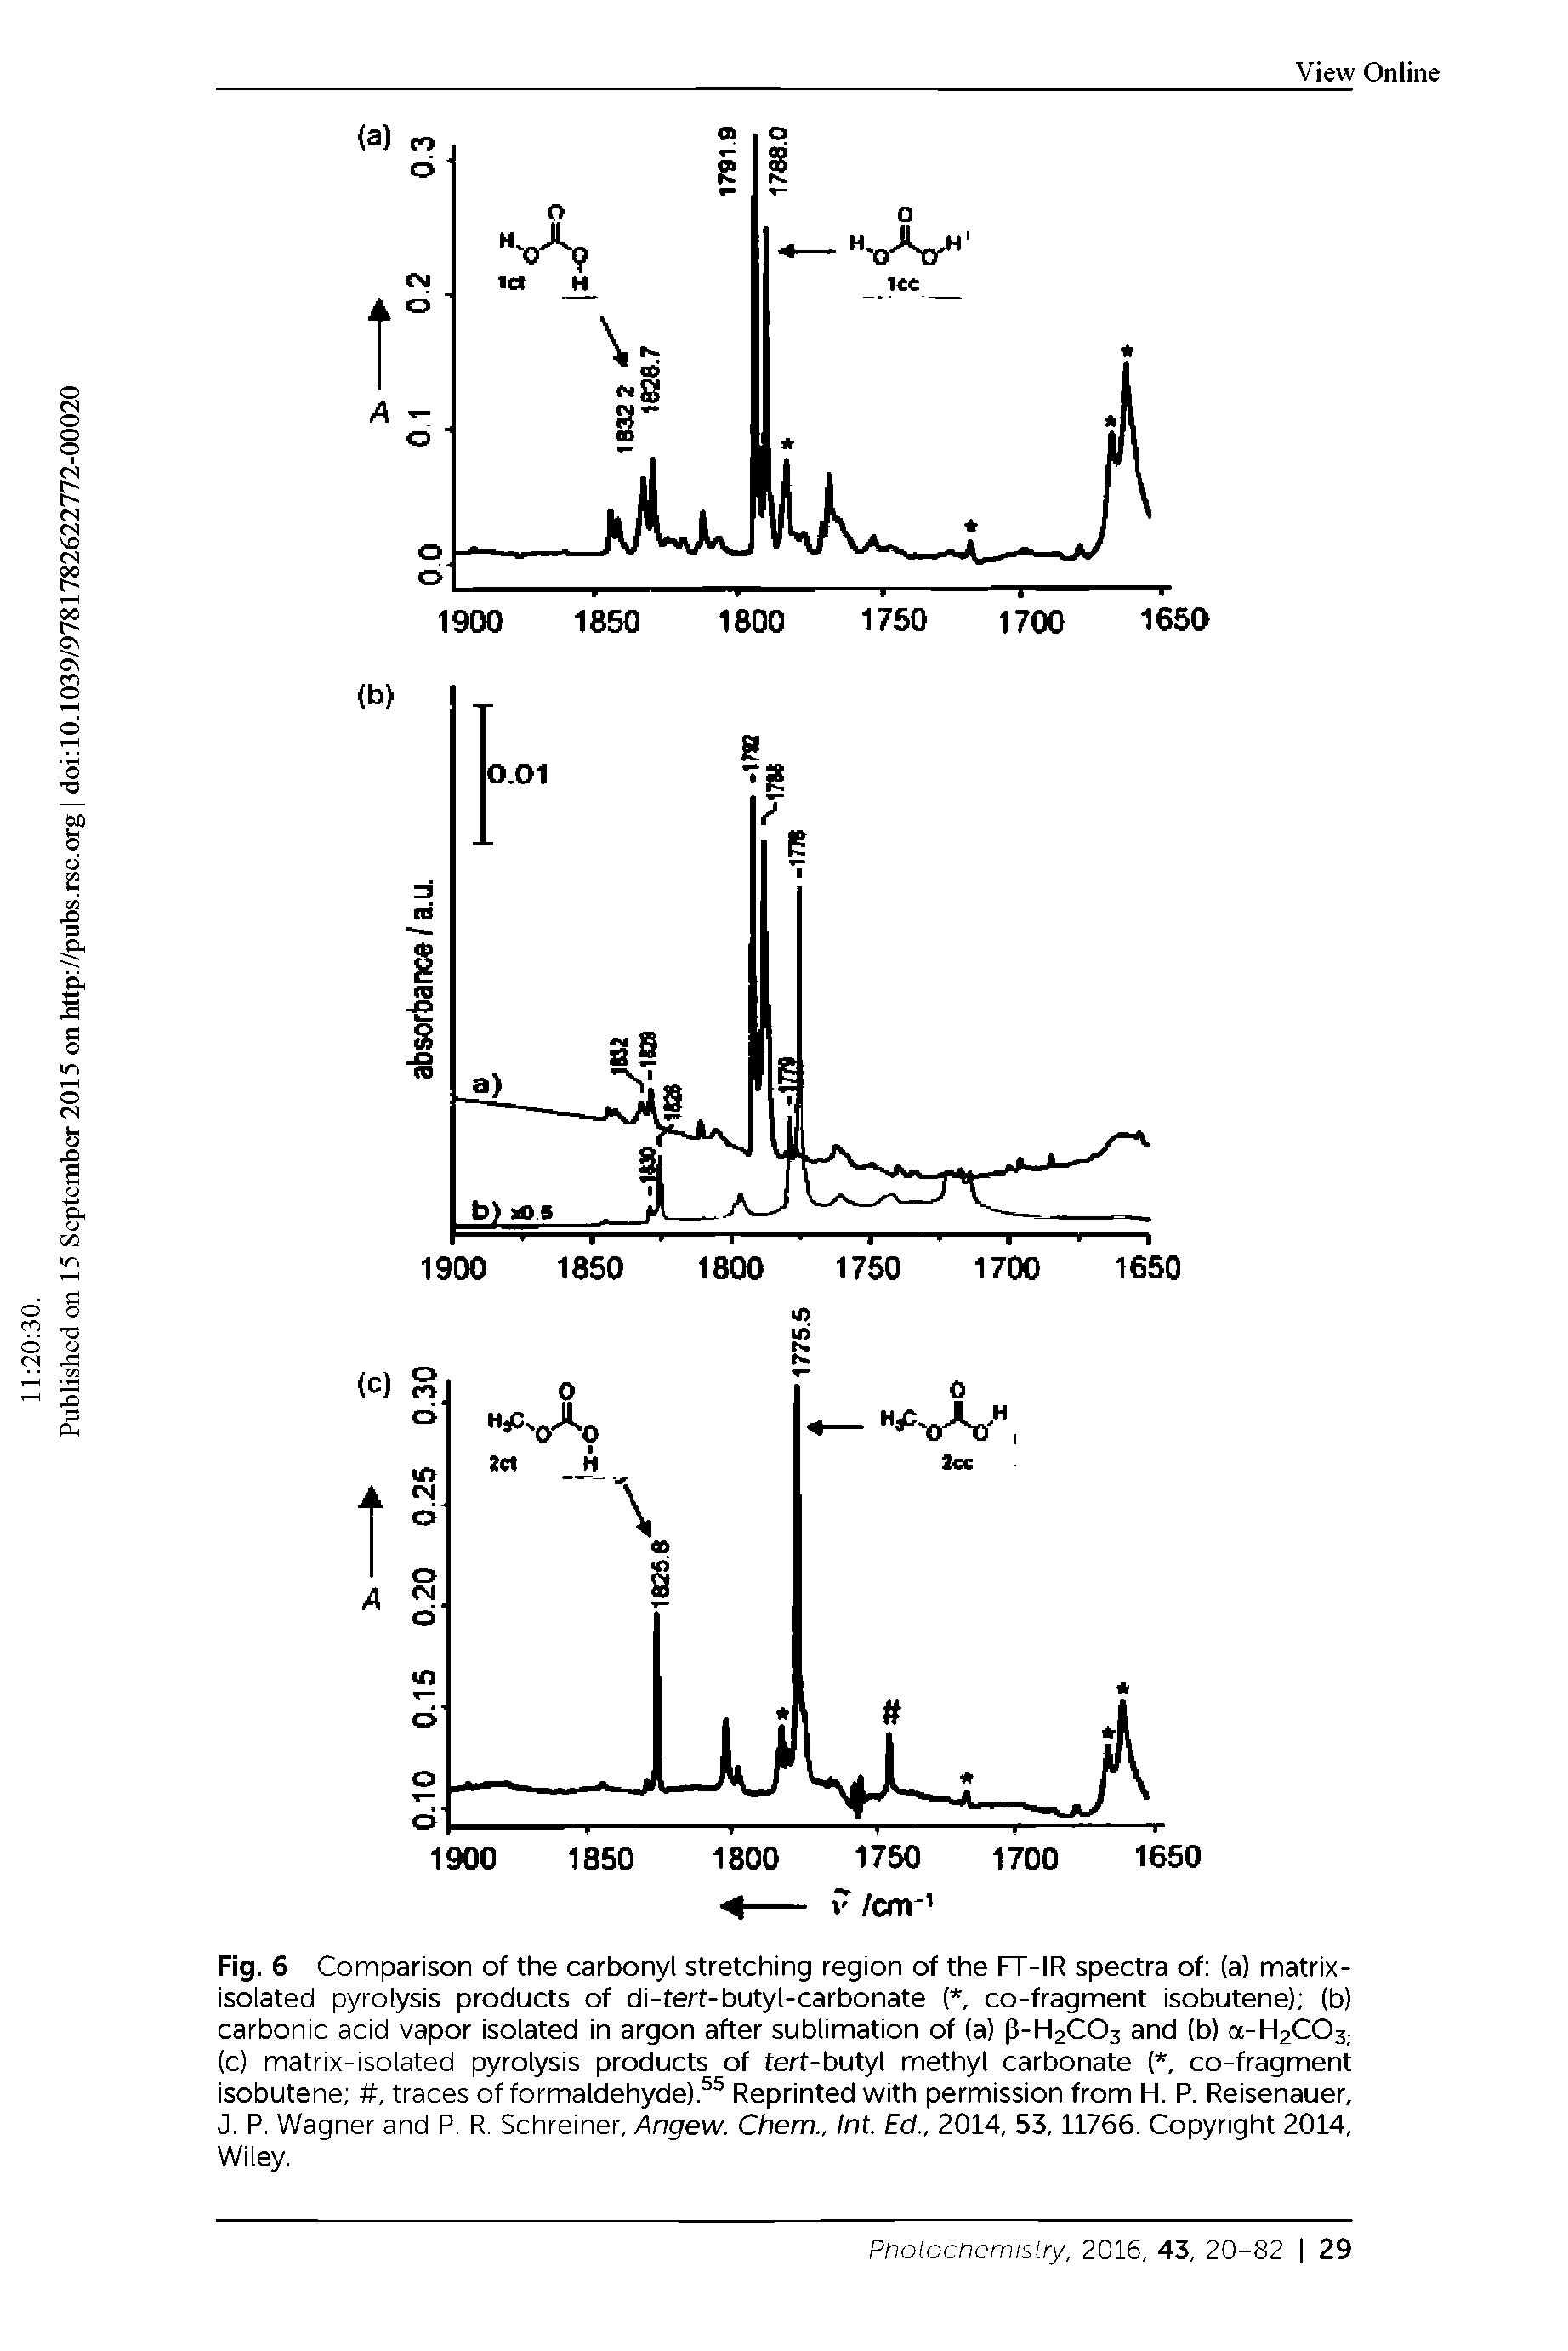 Fig. 6 Comparison of the carbonyl stretching region of the FT-IR spectra of (a) matrix-isolated pyrolysis products of di-tert-butyl-carbonate (, co-fragment isobutene) (b) carbonic acid vapor isolated in argon after sublimation of (a) P-H2CO3 and (b) a-H2C03-(c) matrix-isolated pyrolysis products of tert-butyl methyl carbonate (, co-fragment isobutene , traces of formaldehyde). Reprinted with permission from H. P. Reisenauer, J. P. Wagner and P. R. Schreiner, Angew. Chem., Int. Ed., 2014, 53,11766. Copyright 2014, Wiley.